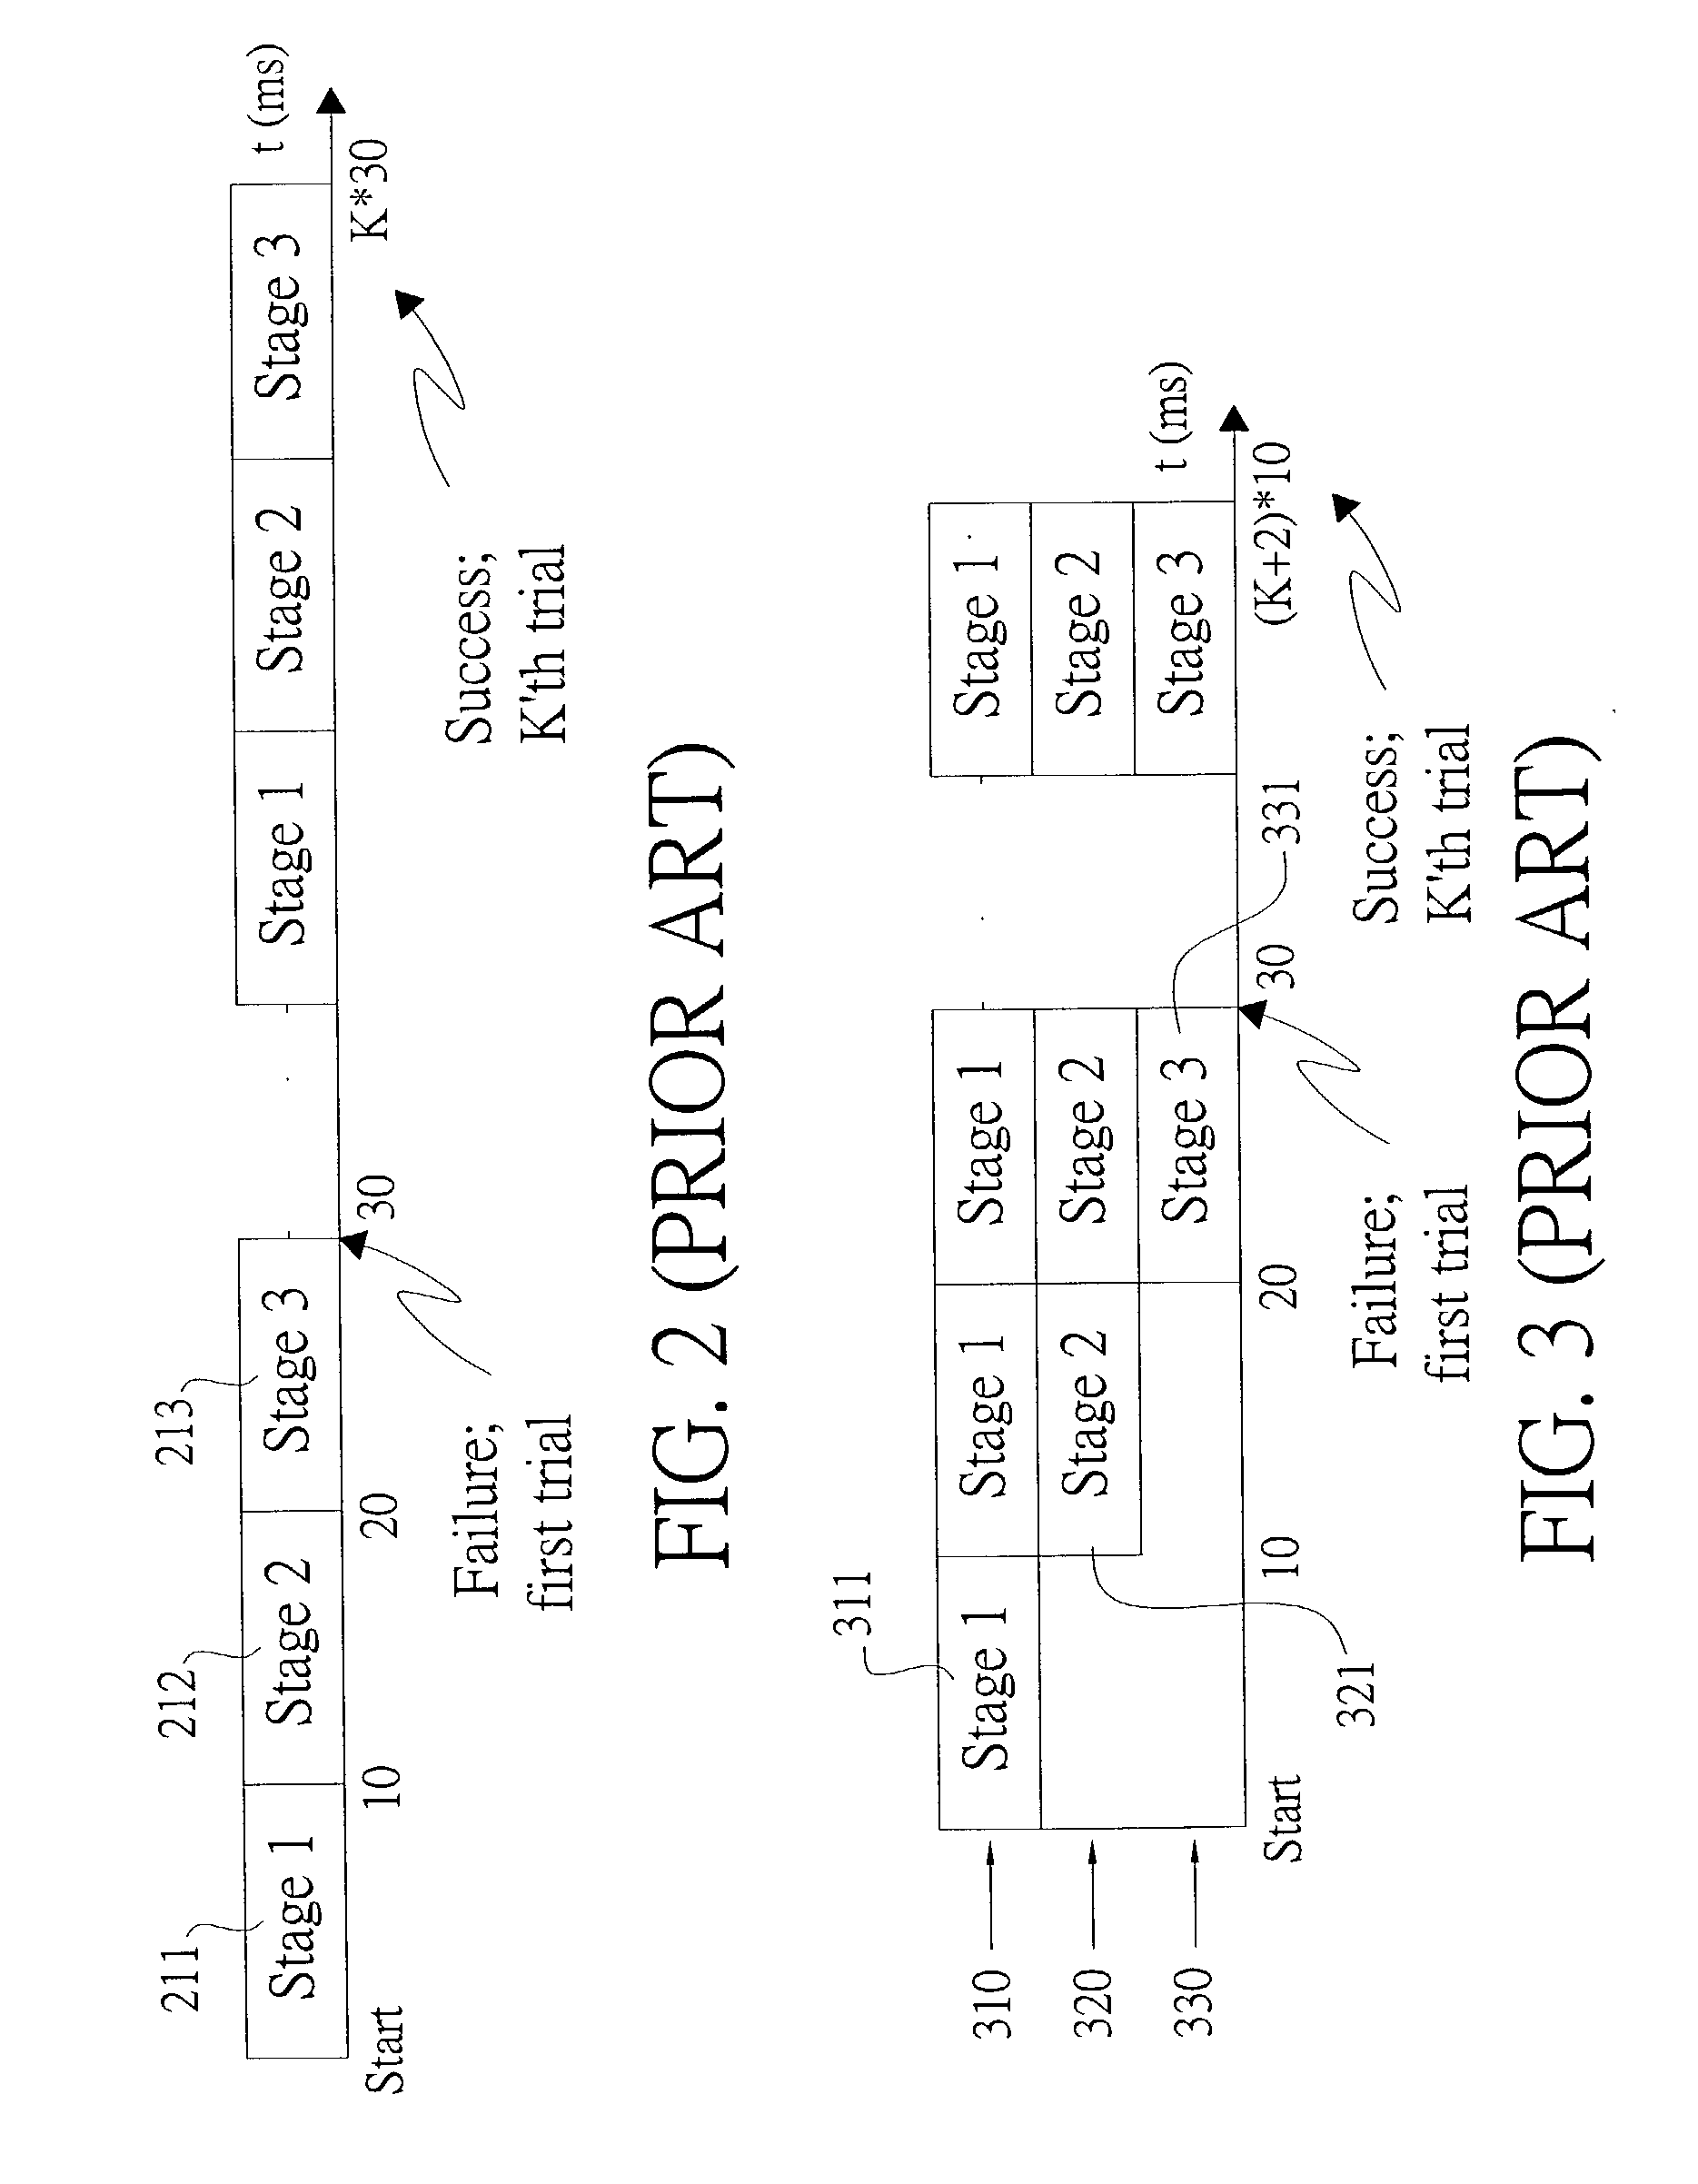 Method for cell search under effect of high clock offset